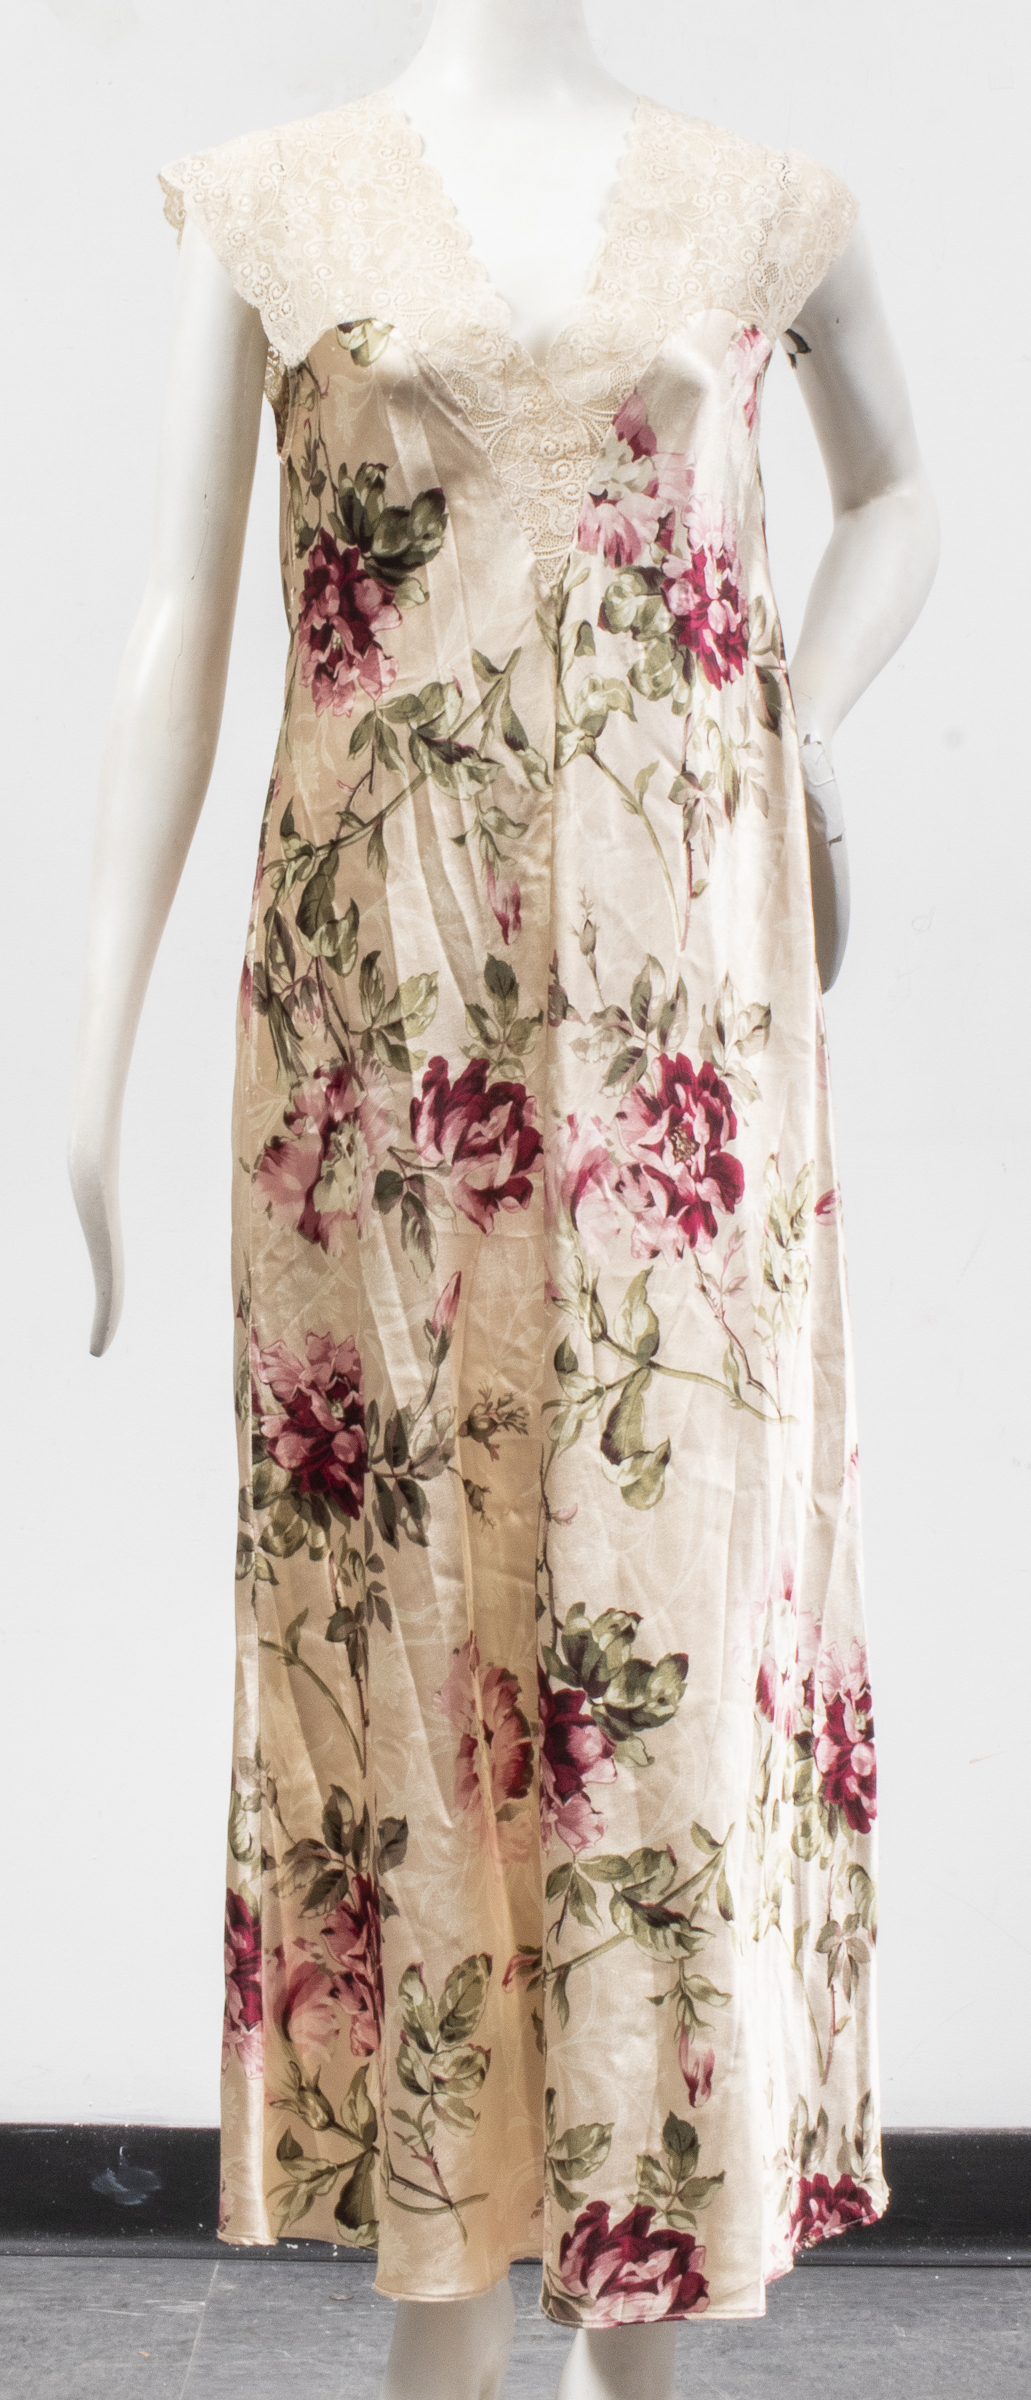 VALENTINO INTIMO FLORAL NIGHTGOWN